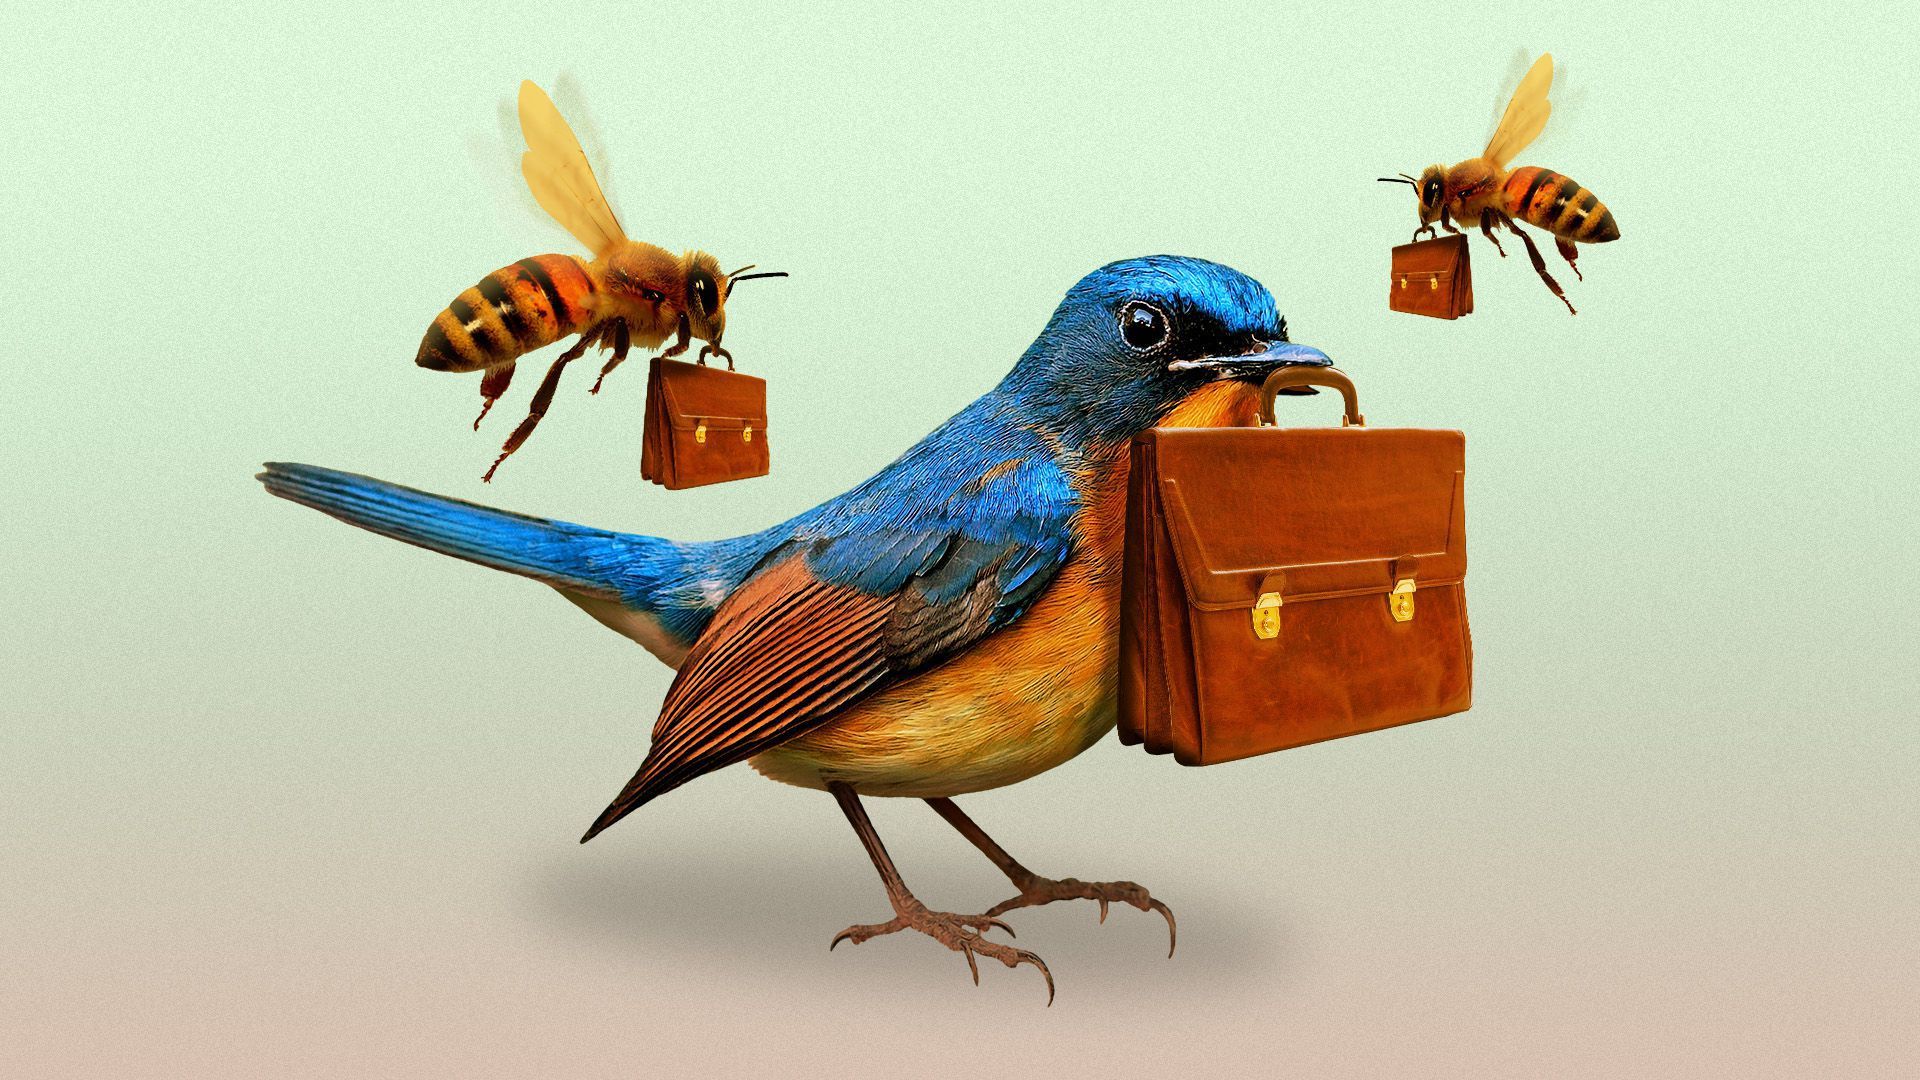 Bees and a bird with suitcases